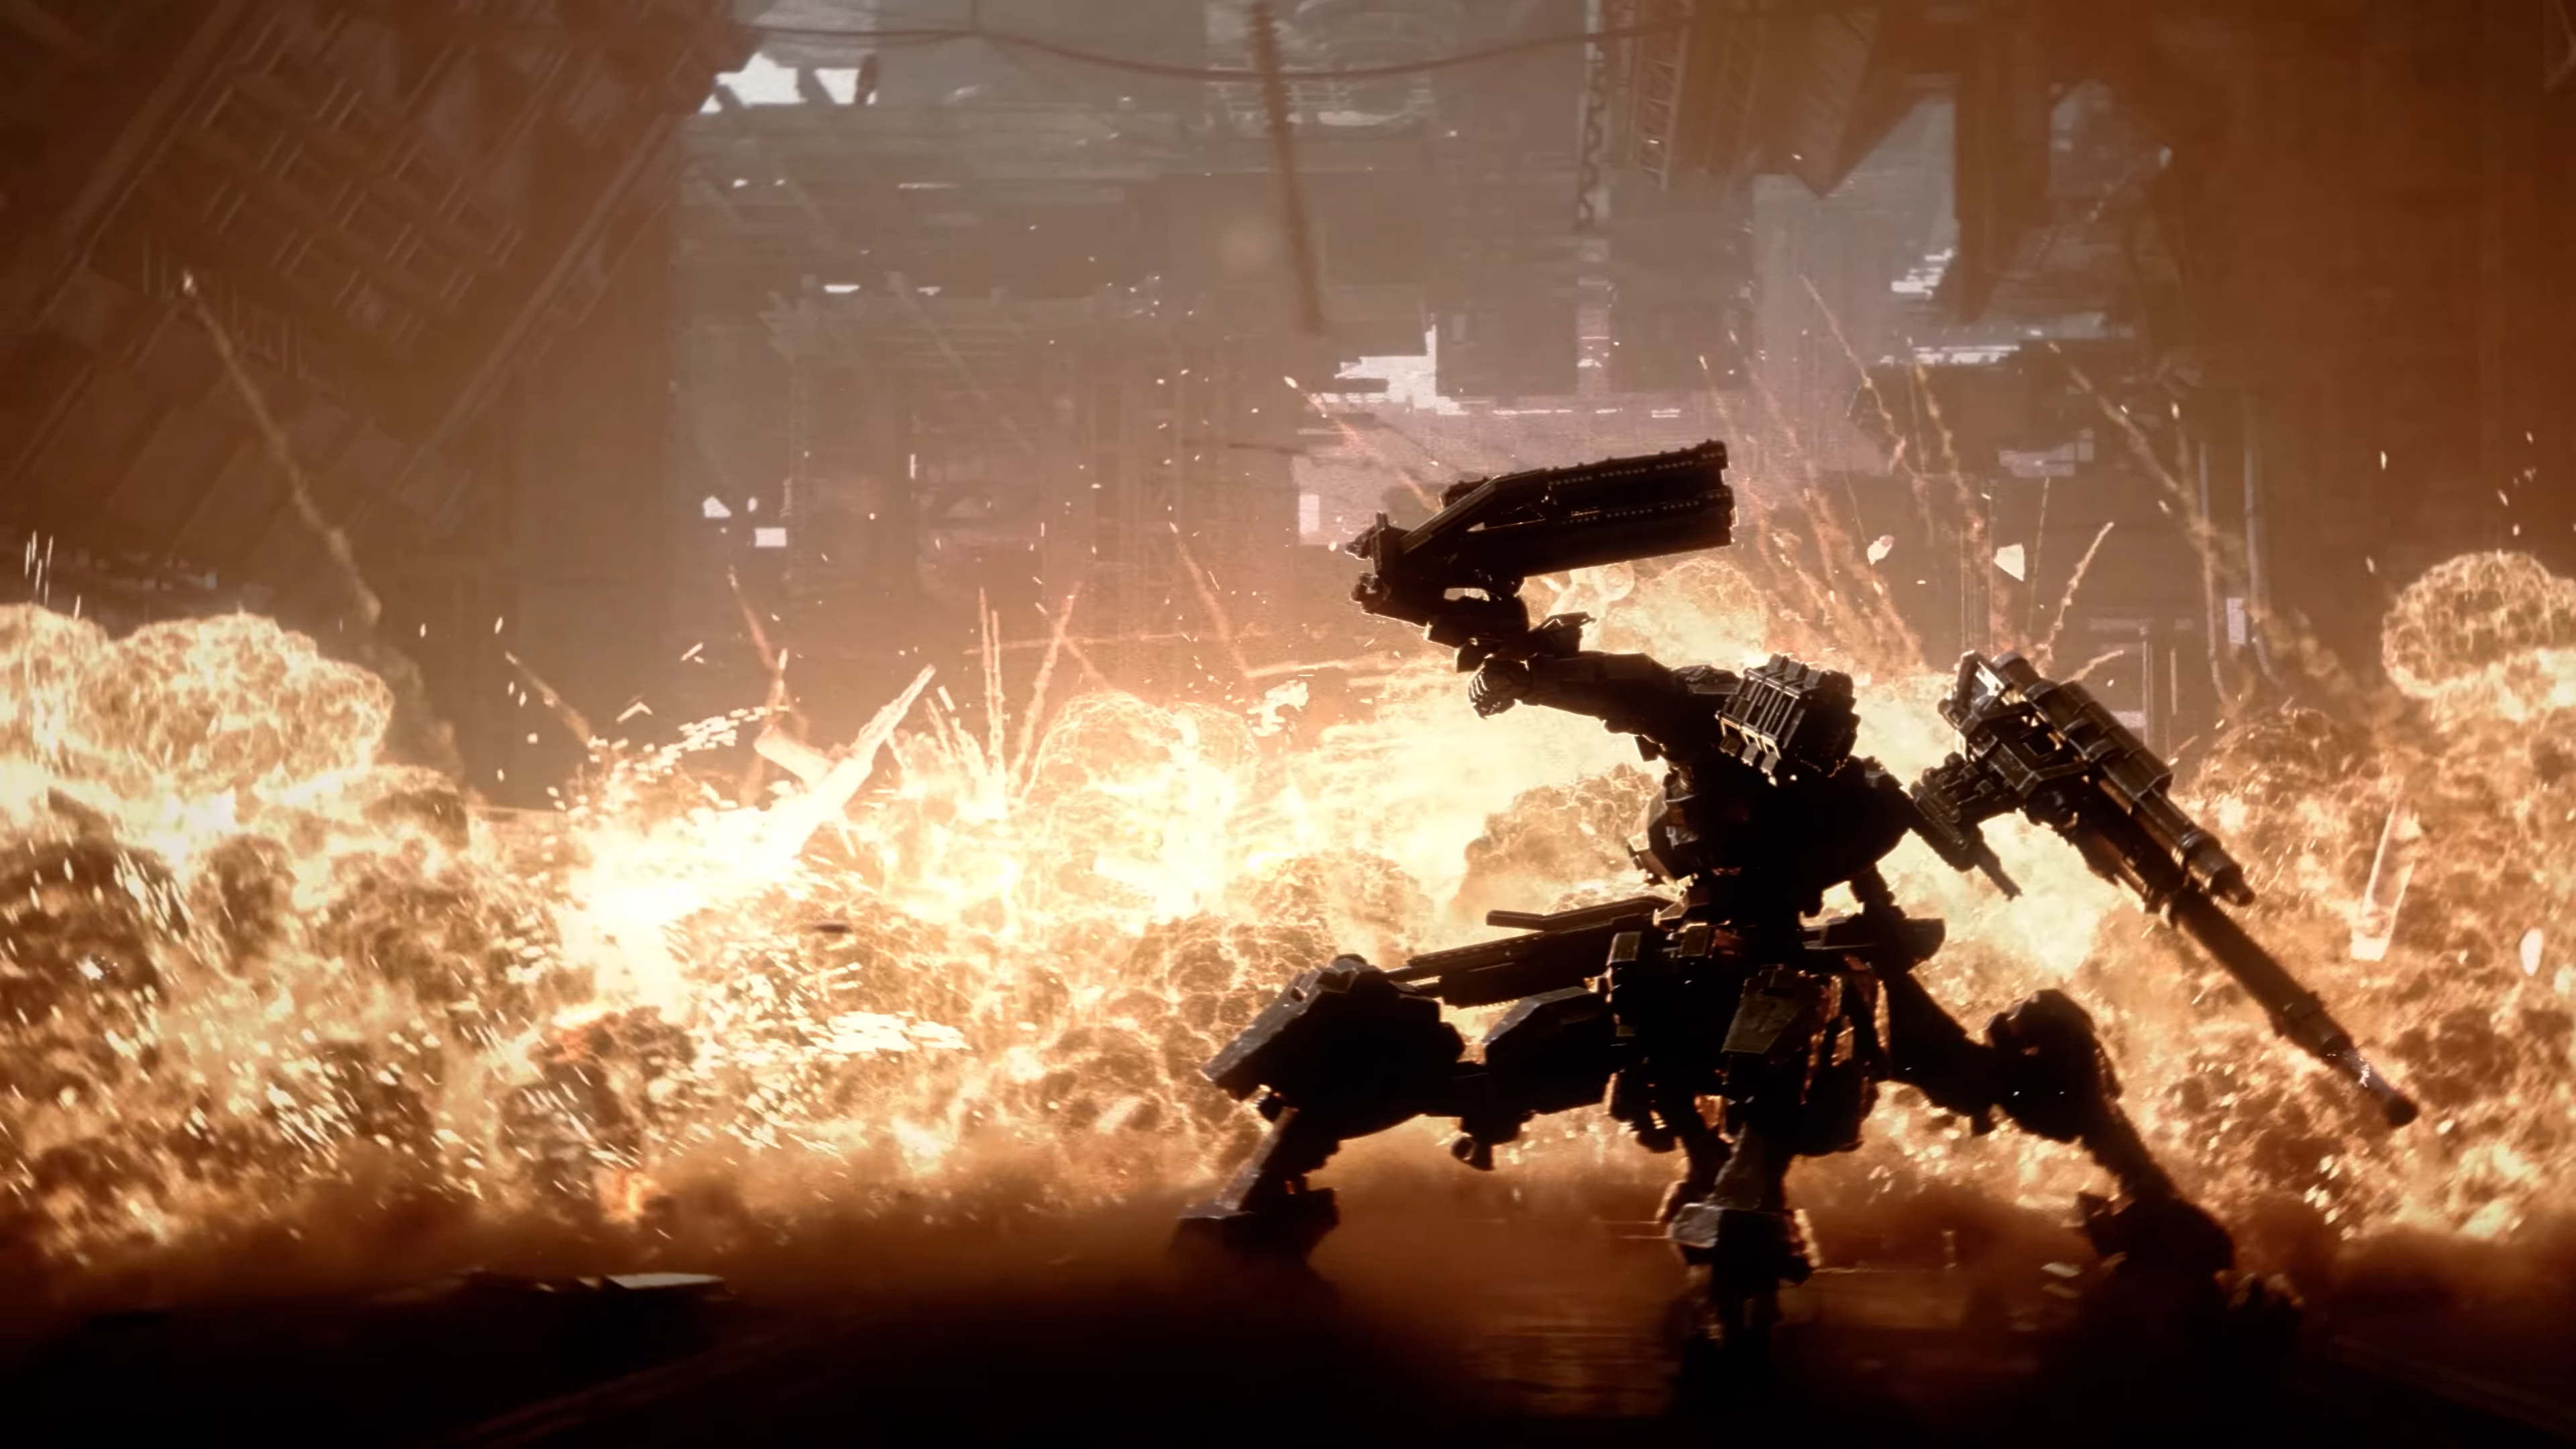 General 3840x2160 Armored Core Armored Core VI video games video game art mechs robot fire